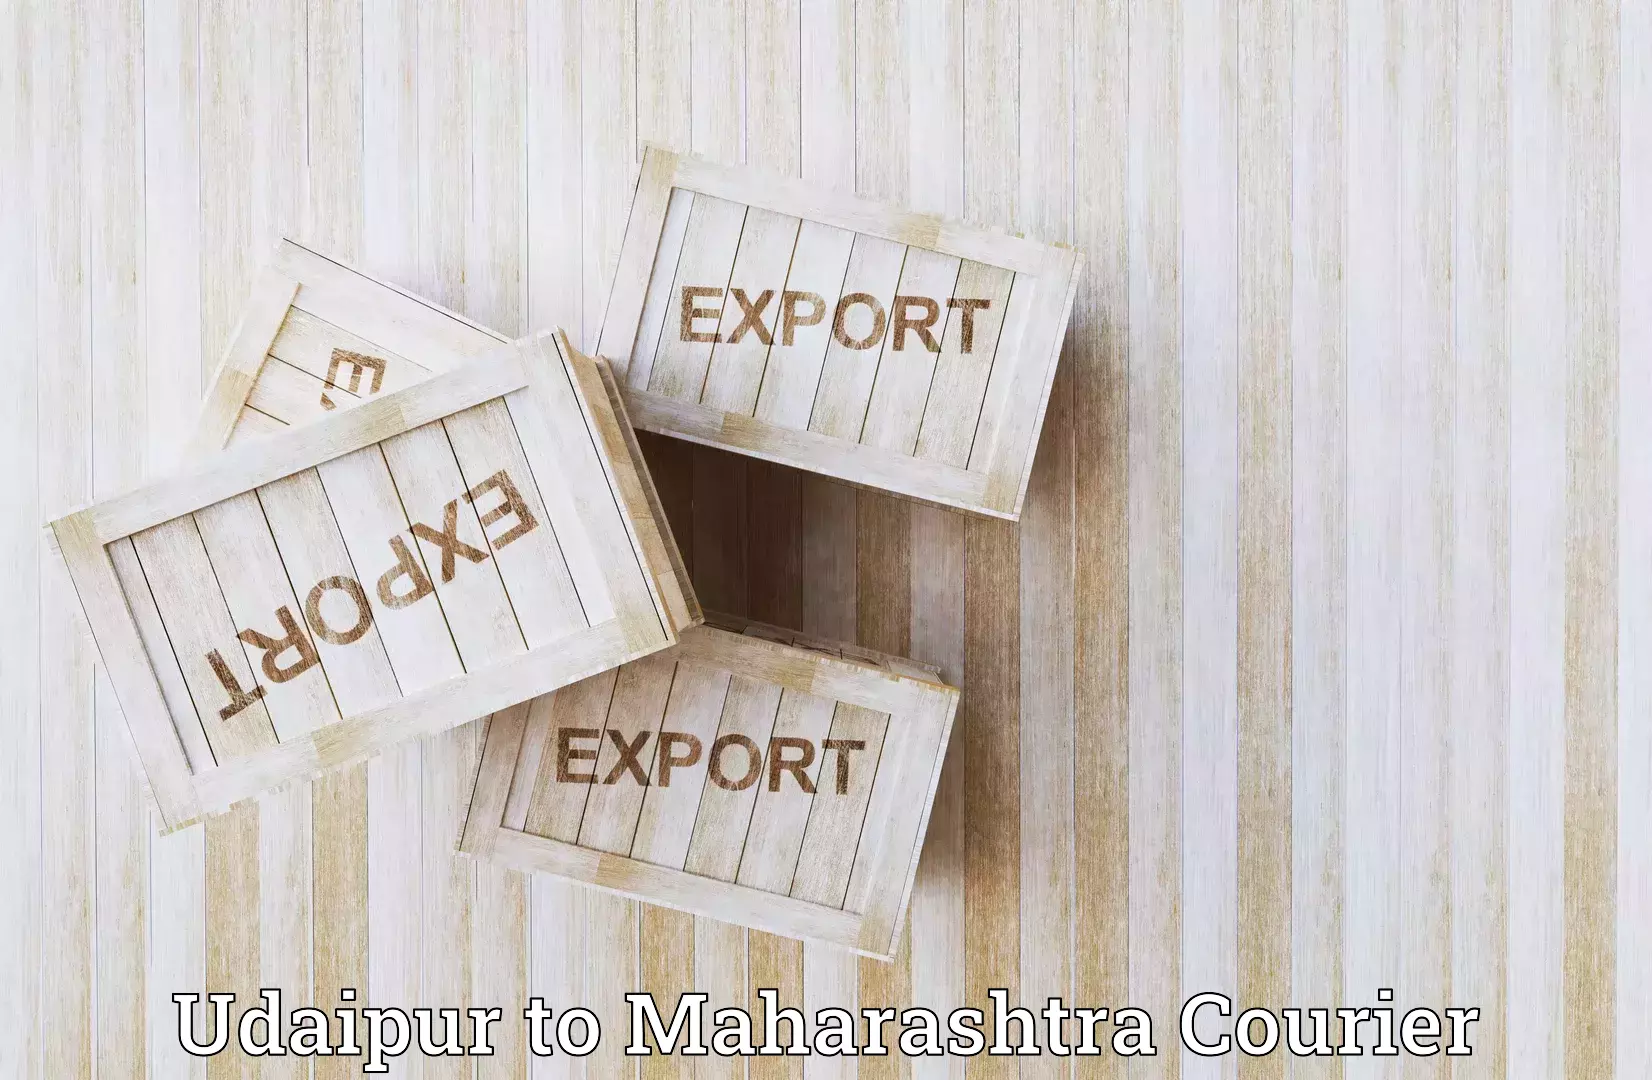 Ocean freight courier Udaipur to Mangaon